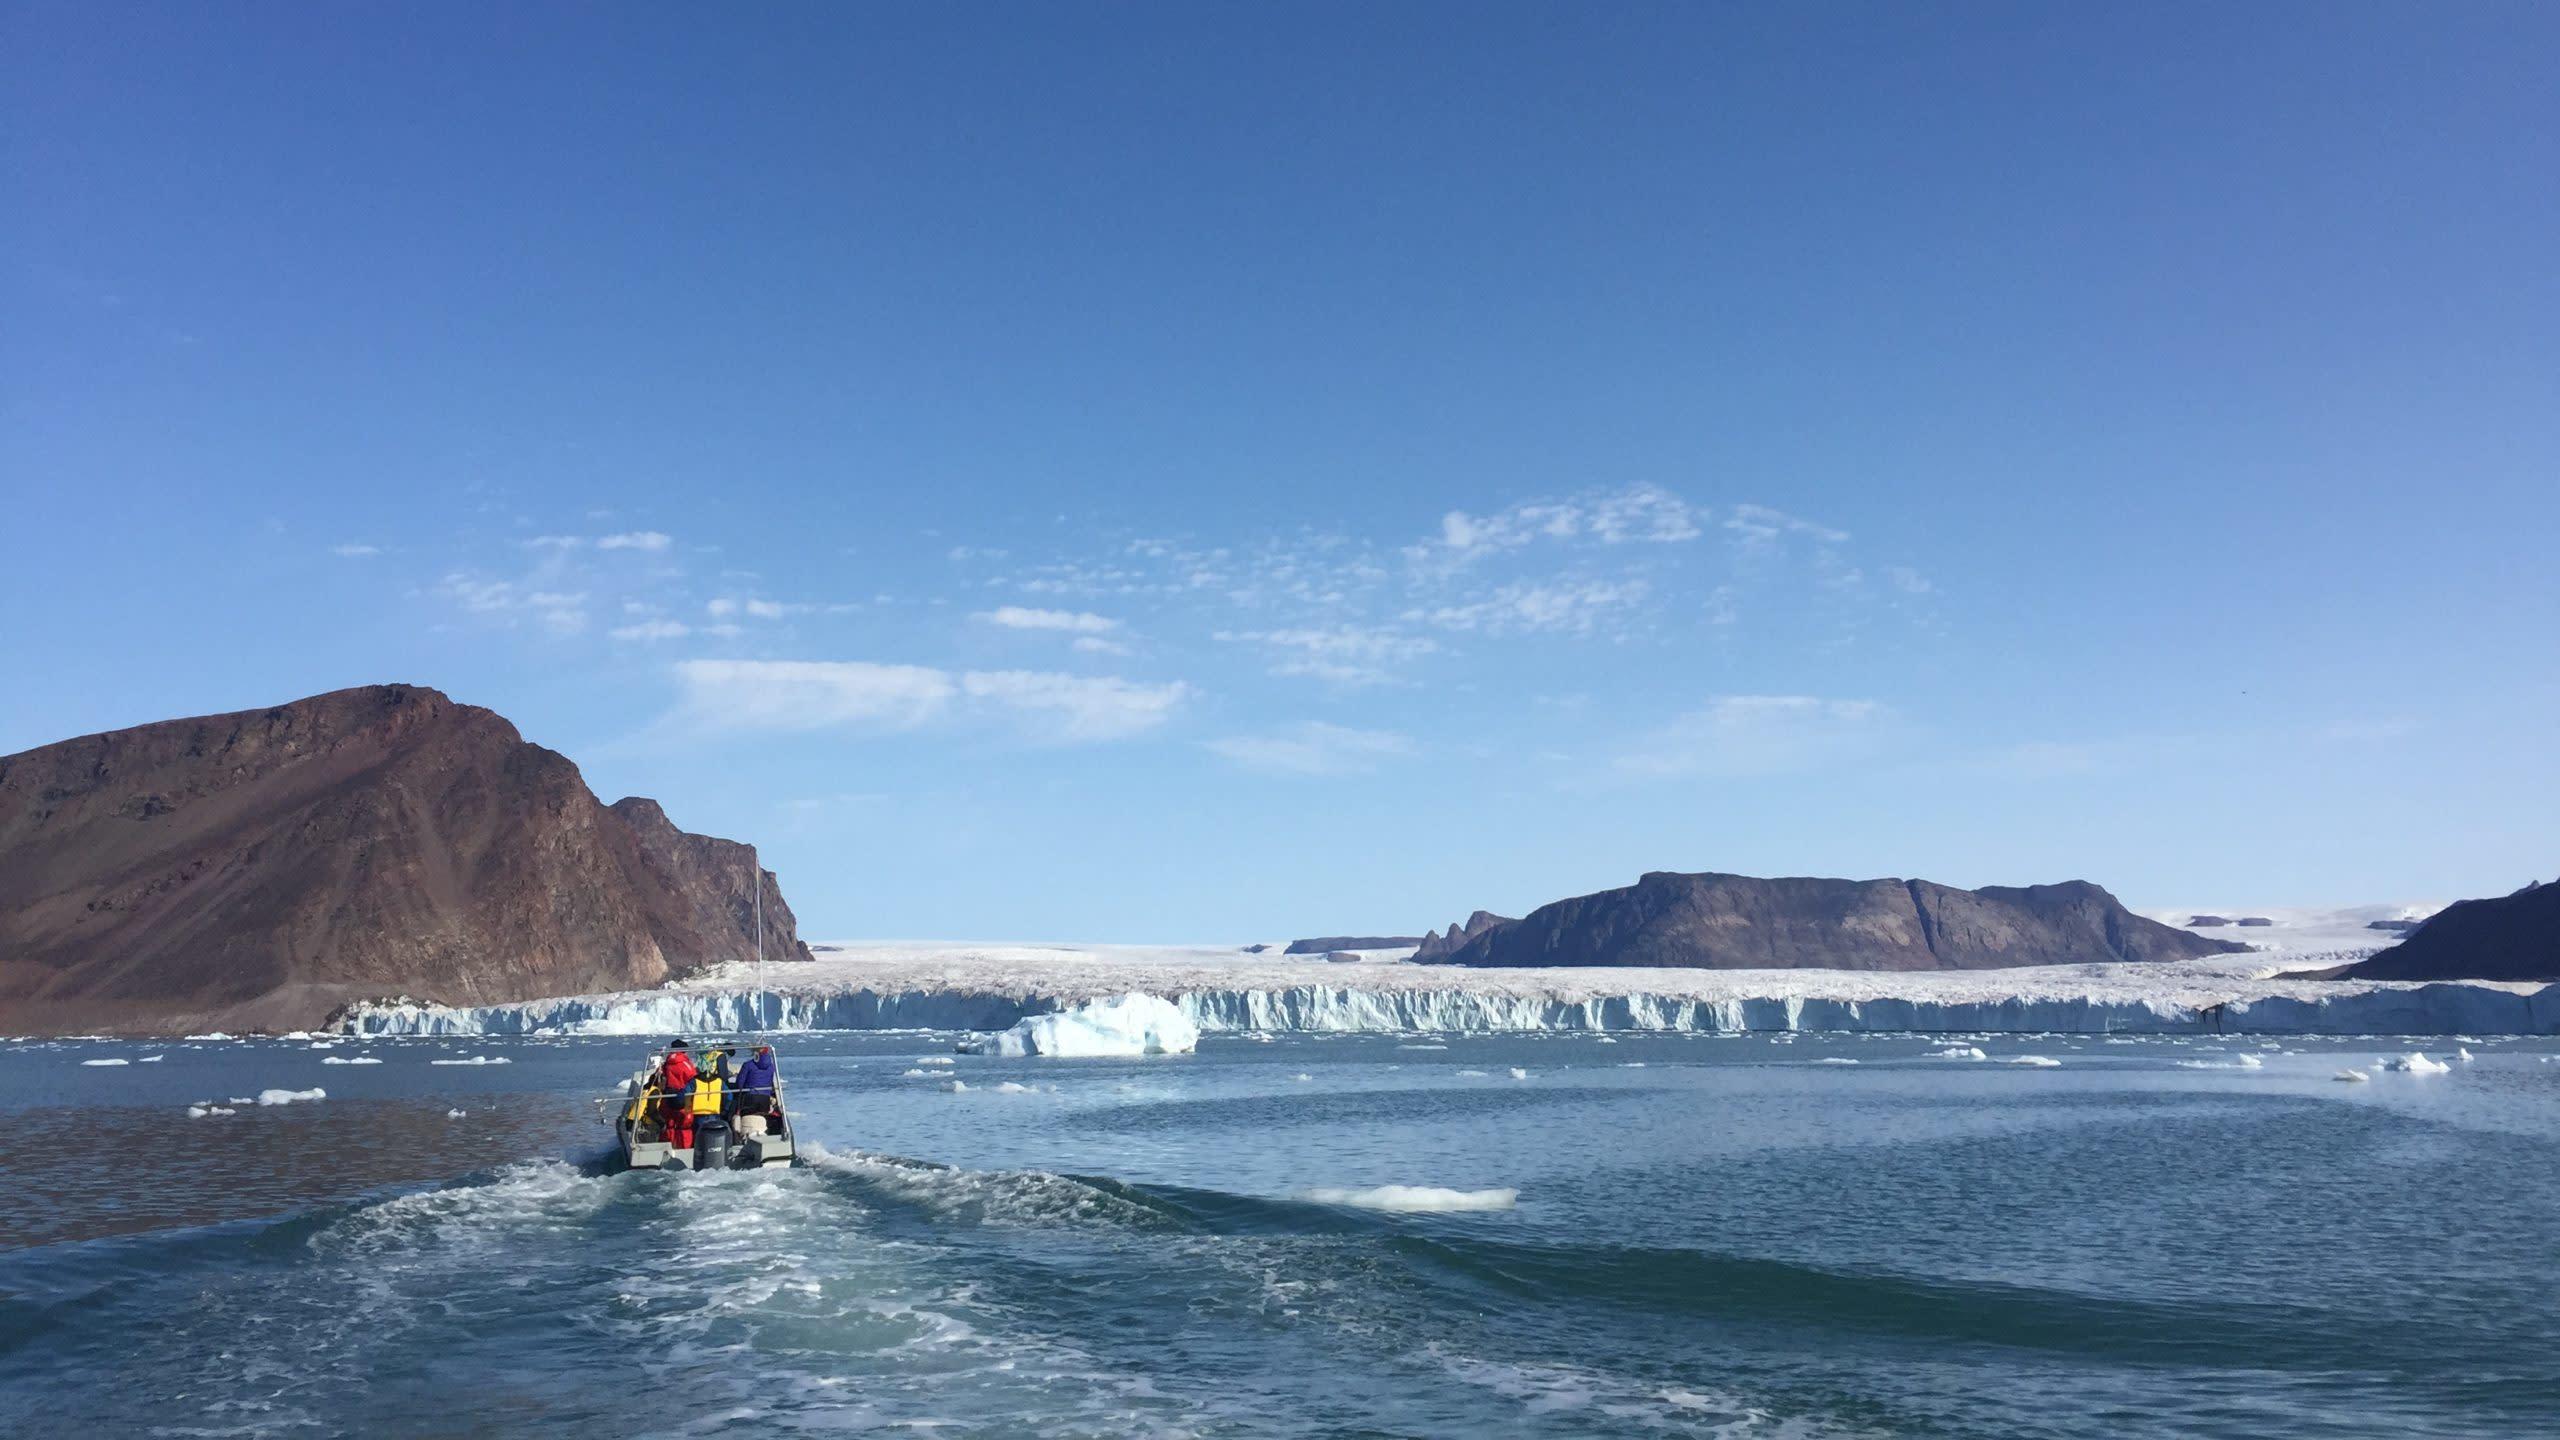 Researchers and Inuit hunters approach Bowdoin Glacier in northwest Greenland. (Image: Evgeny Podolskiy)